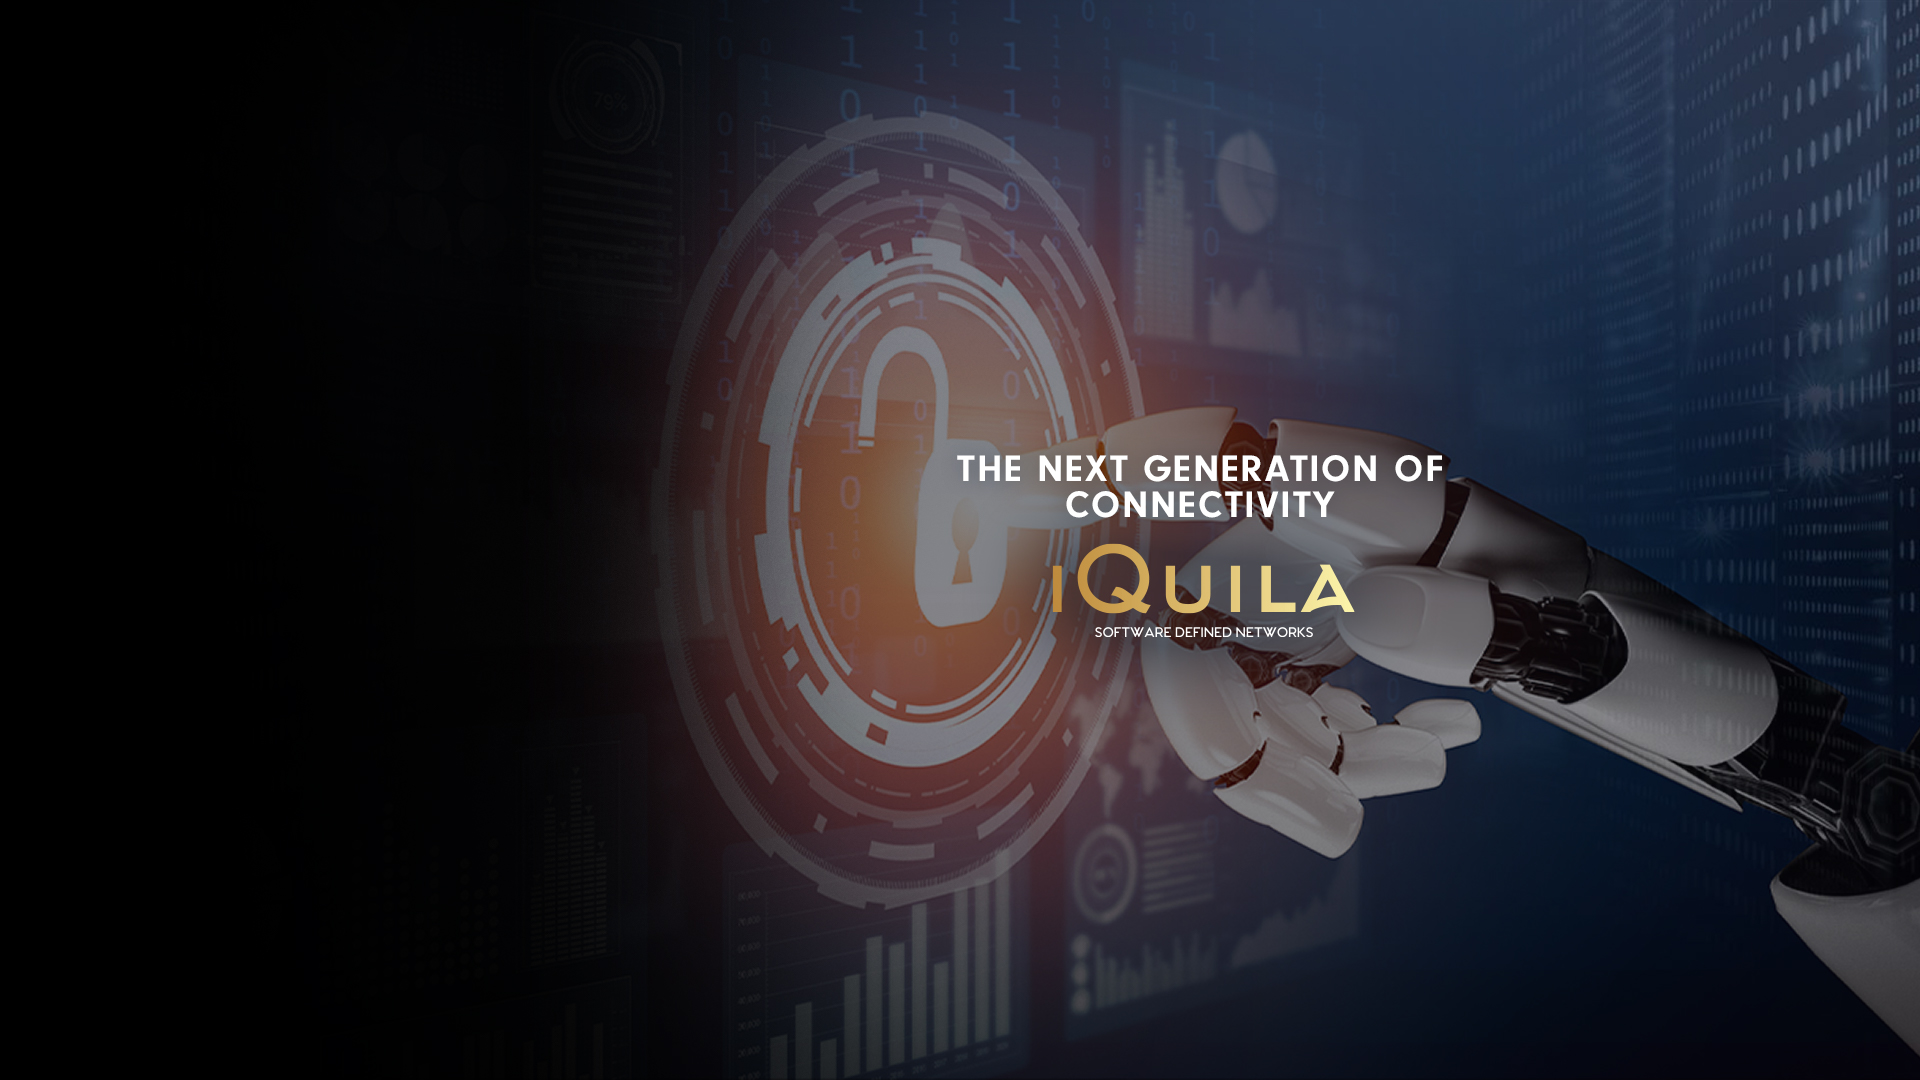 iQuila - Software Defined Networks